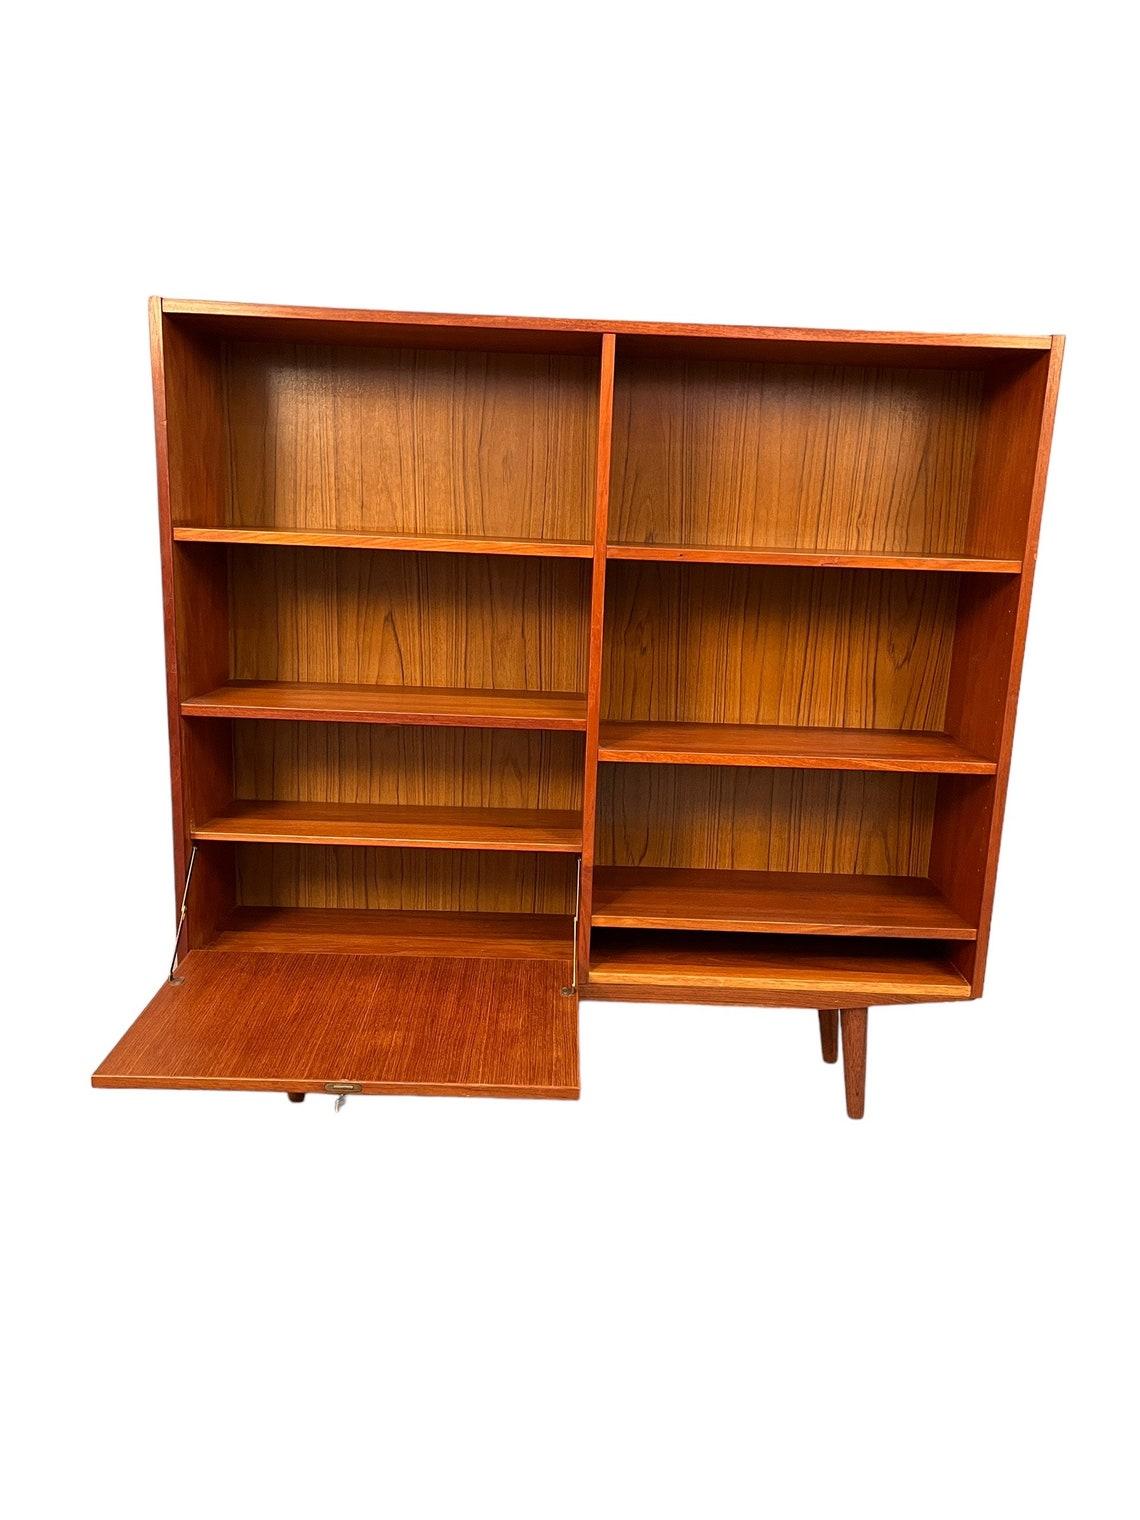 Mid-Century Teak bookcase on sharpened teak legs. 
This danish piece stands with plenty of storage and low cabinet.

Dimensions:
L:47 D:16 H:45 inches 

Condition:
very good for age and use